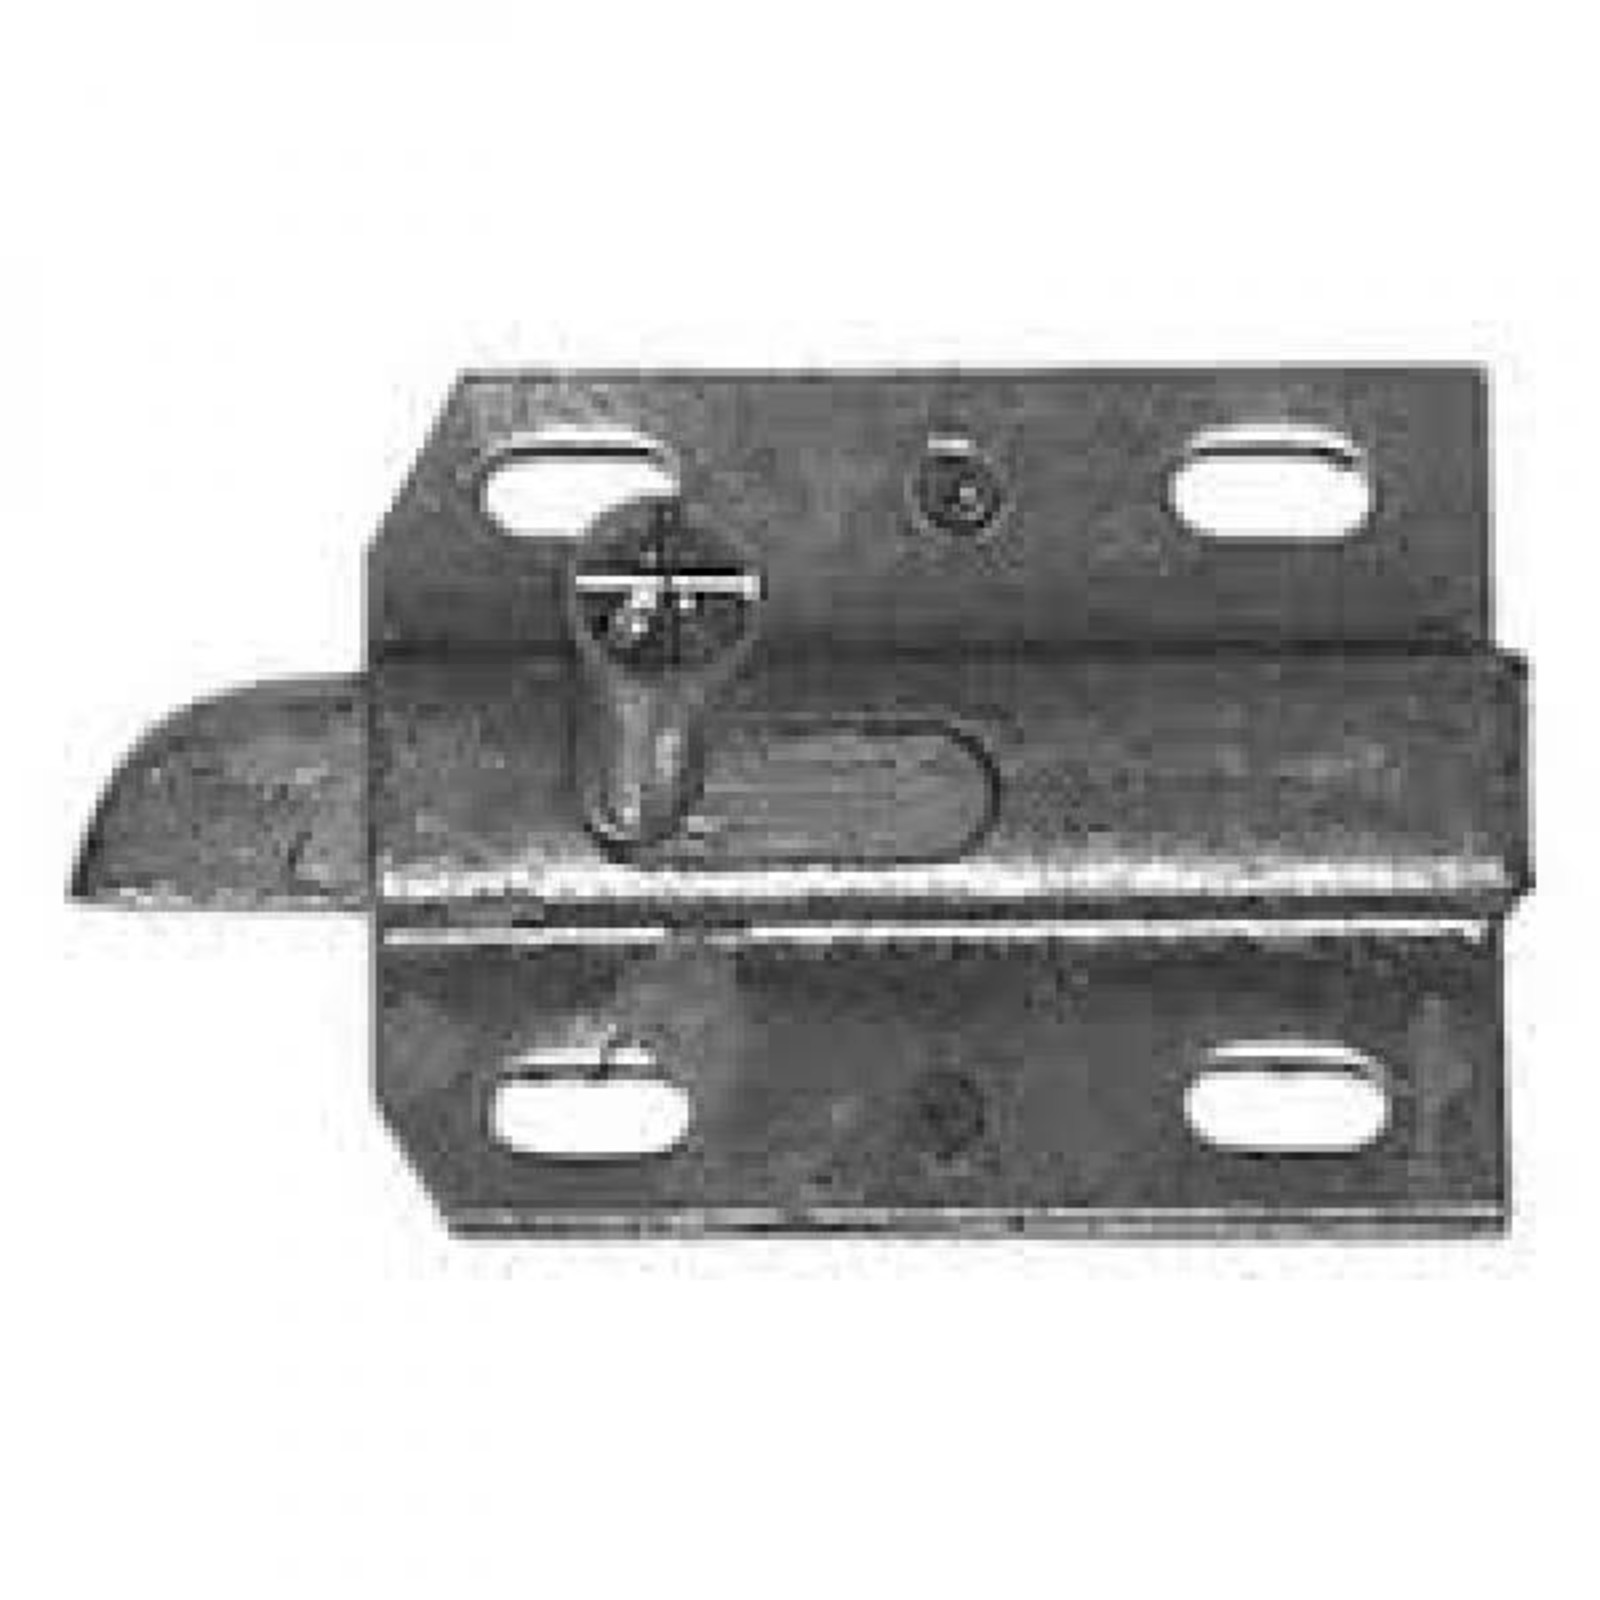 Mustang Spare Parts: 65-66 FB Fold Down Seat Latches